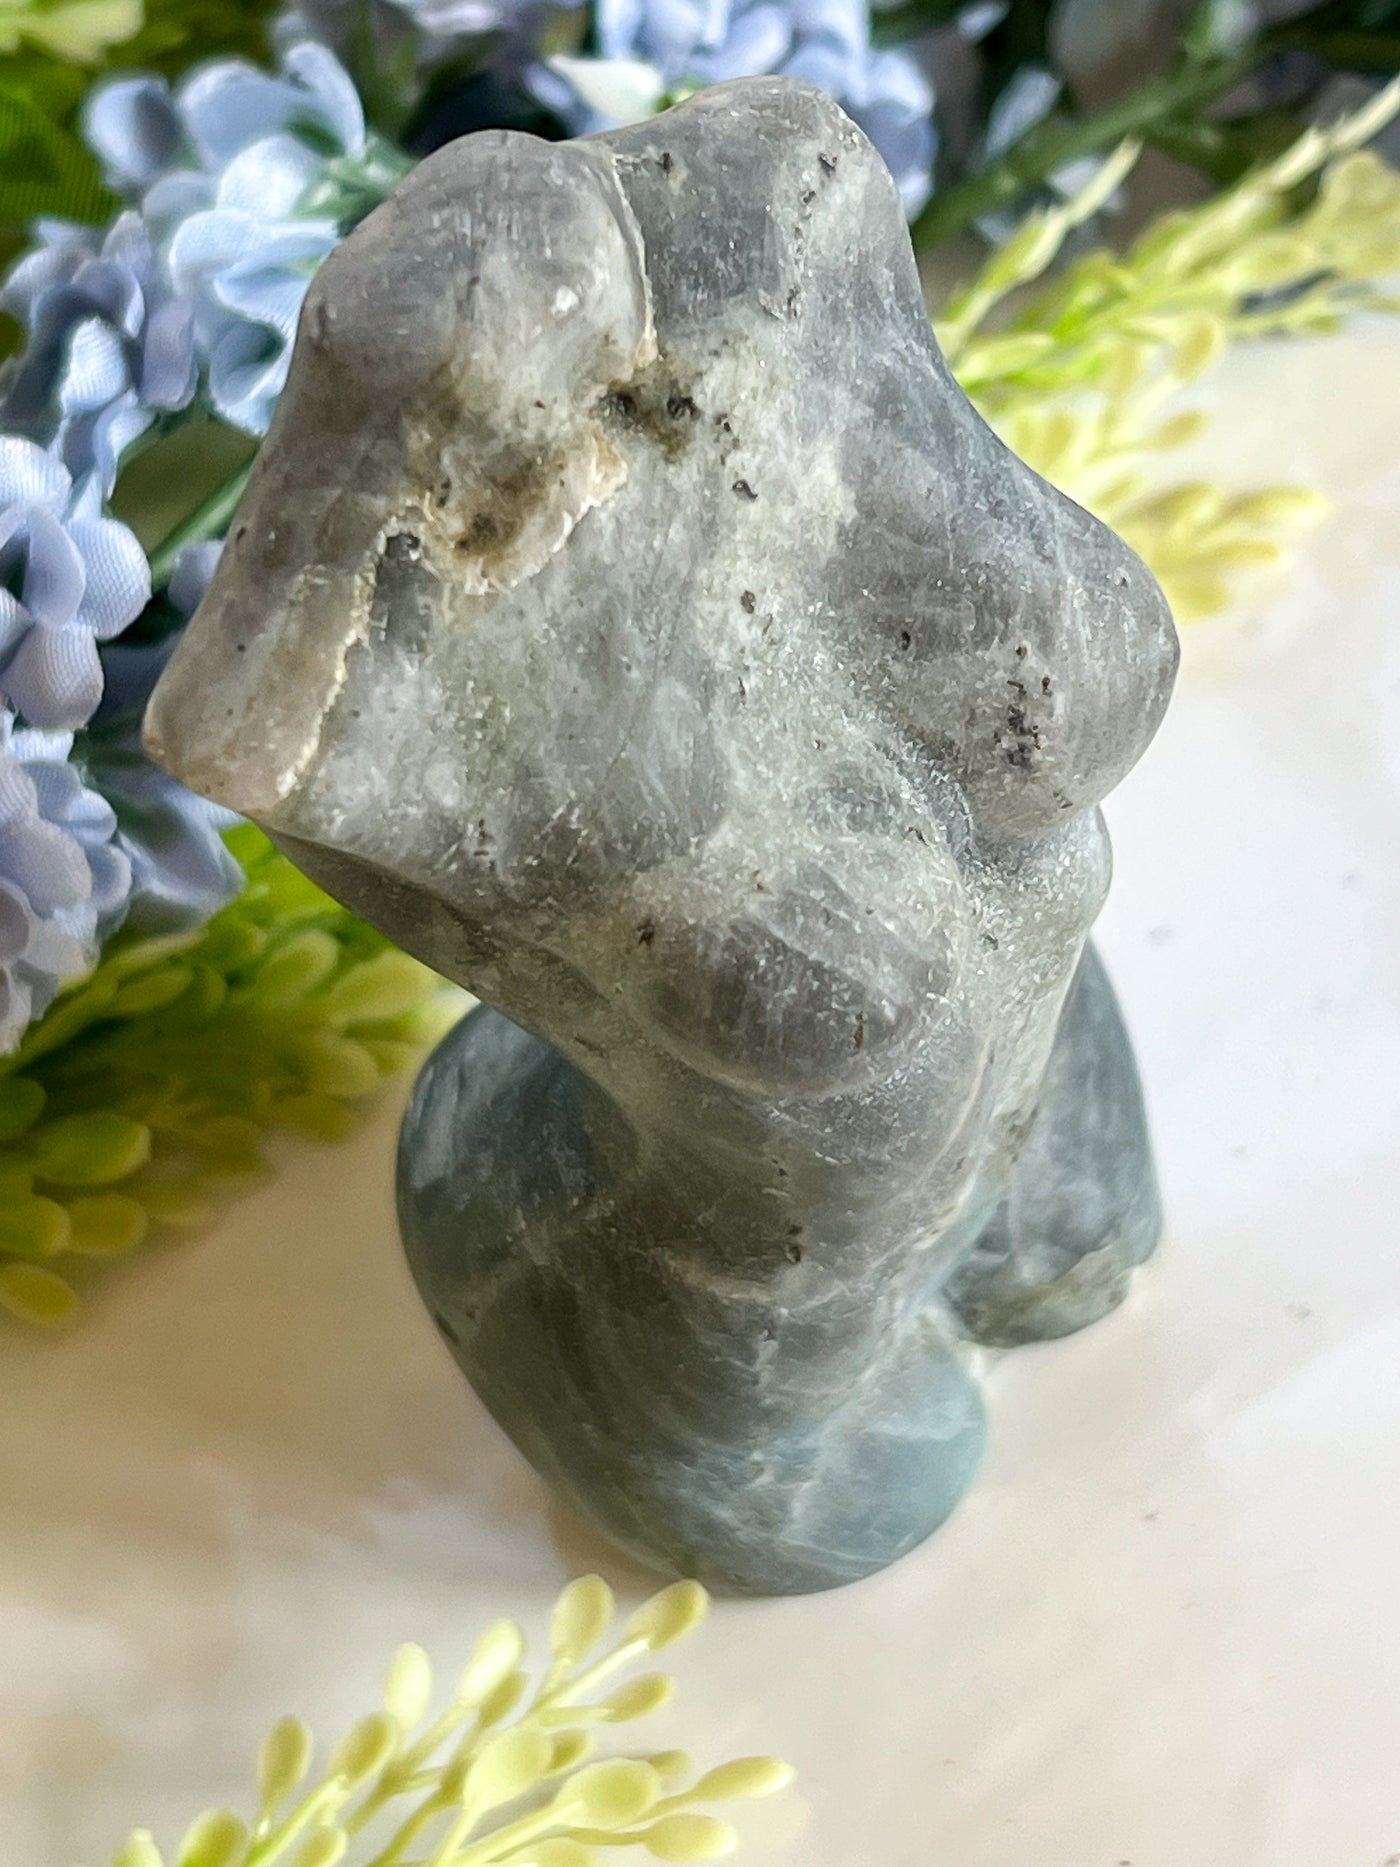 LABRADORITE WOMAN BODY CARVING Revive In Style Vintage Furniture Painted Refinished Redesign Beautiful One of a Kind Artistic Antique Unique Home Decor Interior Design French Country Shabby Chic Cottage Farmhouse Grandmillenial Coastal Chalk Paint Metallic Glam Eclectic Quality Dovetailed Rustic Furniture Painter Pinterest Bedroom Living Room Entryway Kitchen Home Trends House Styles Decorating ideas